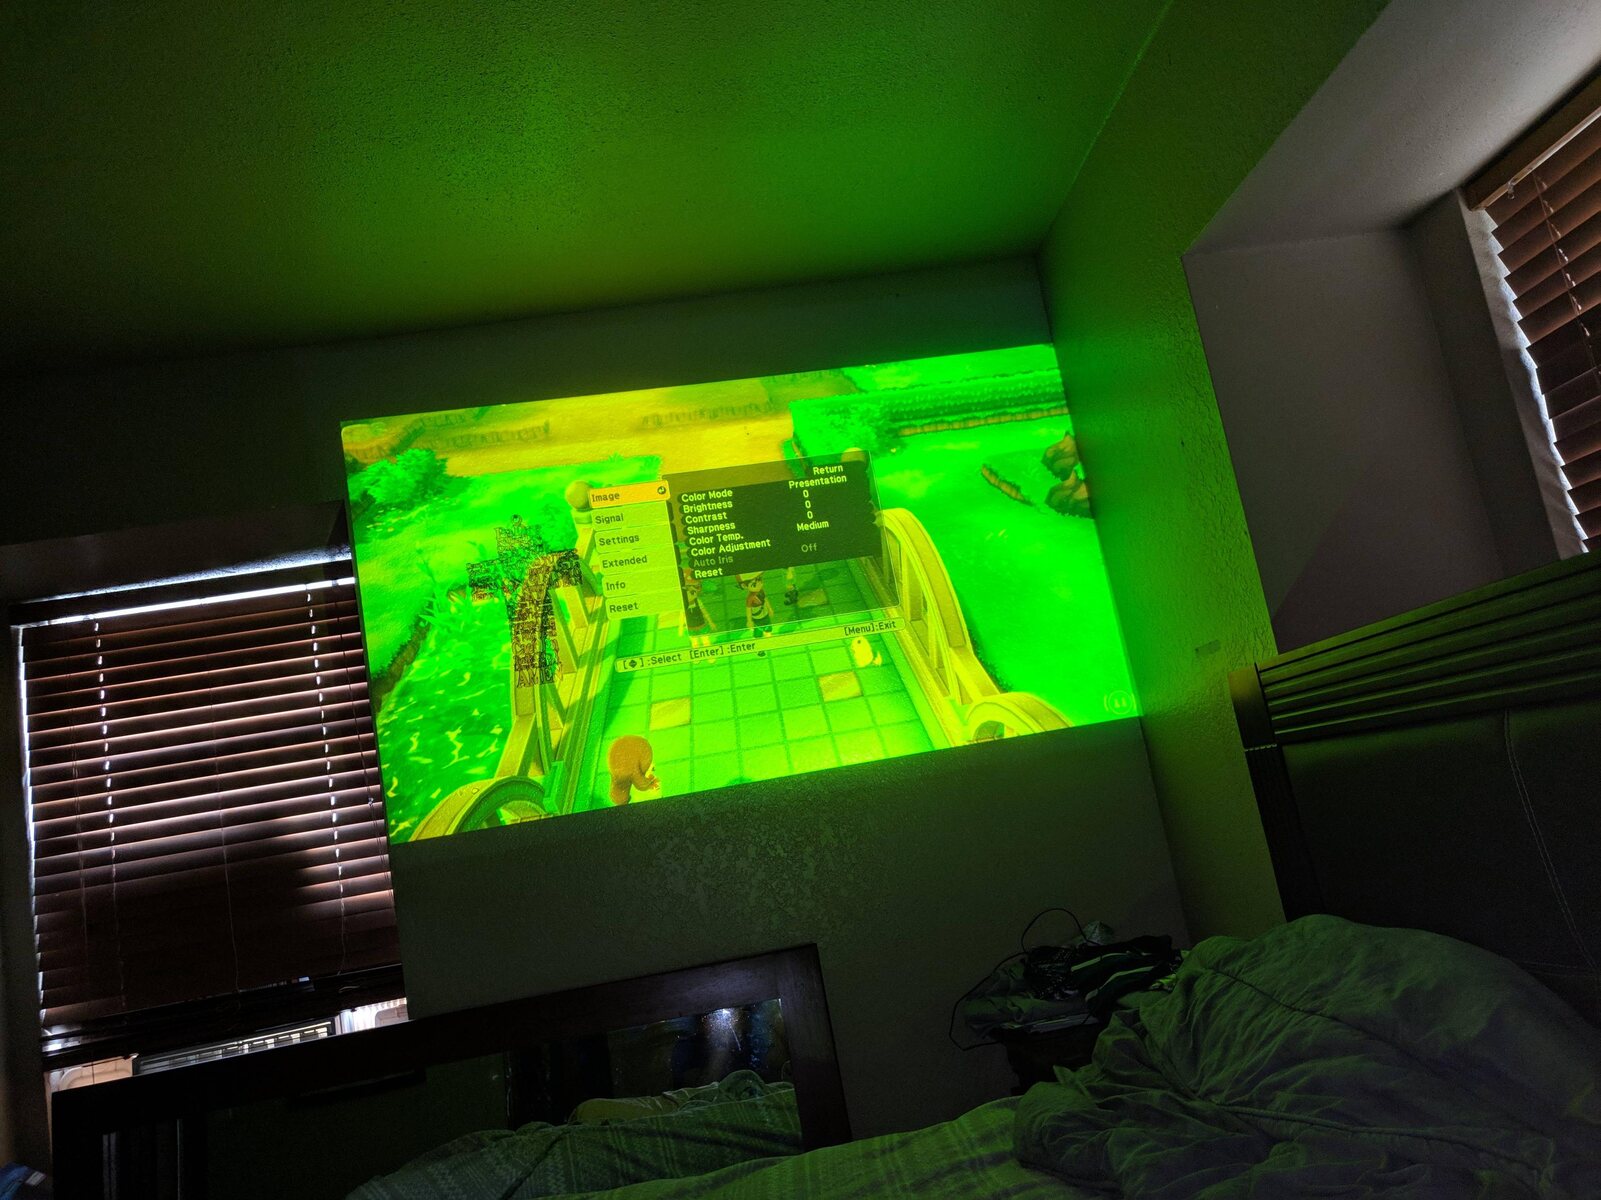 Why Is My Projector Projecting Yellow